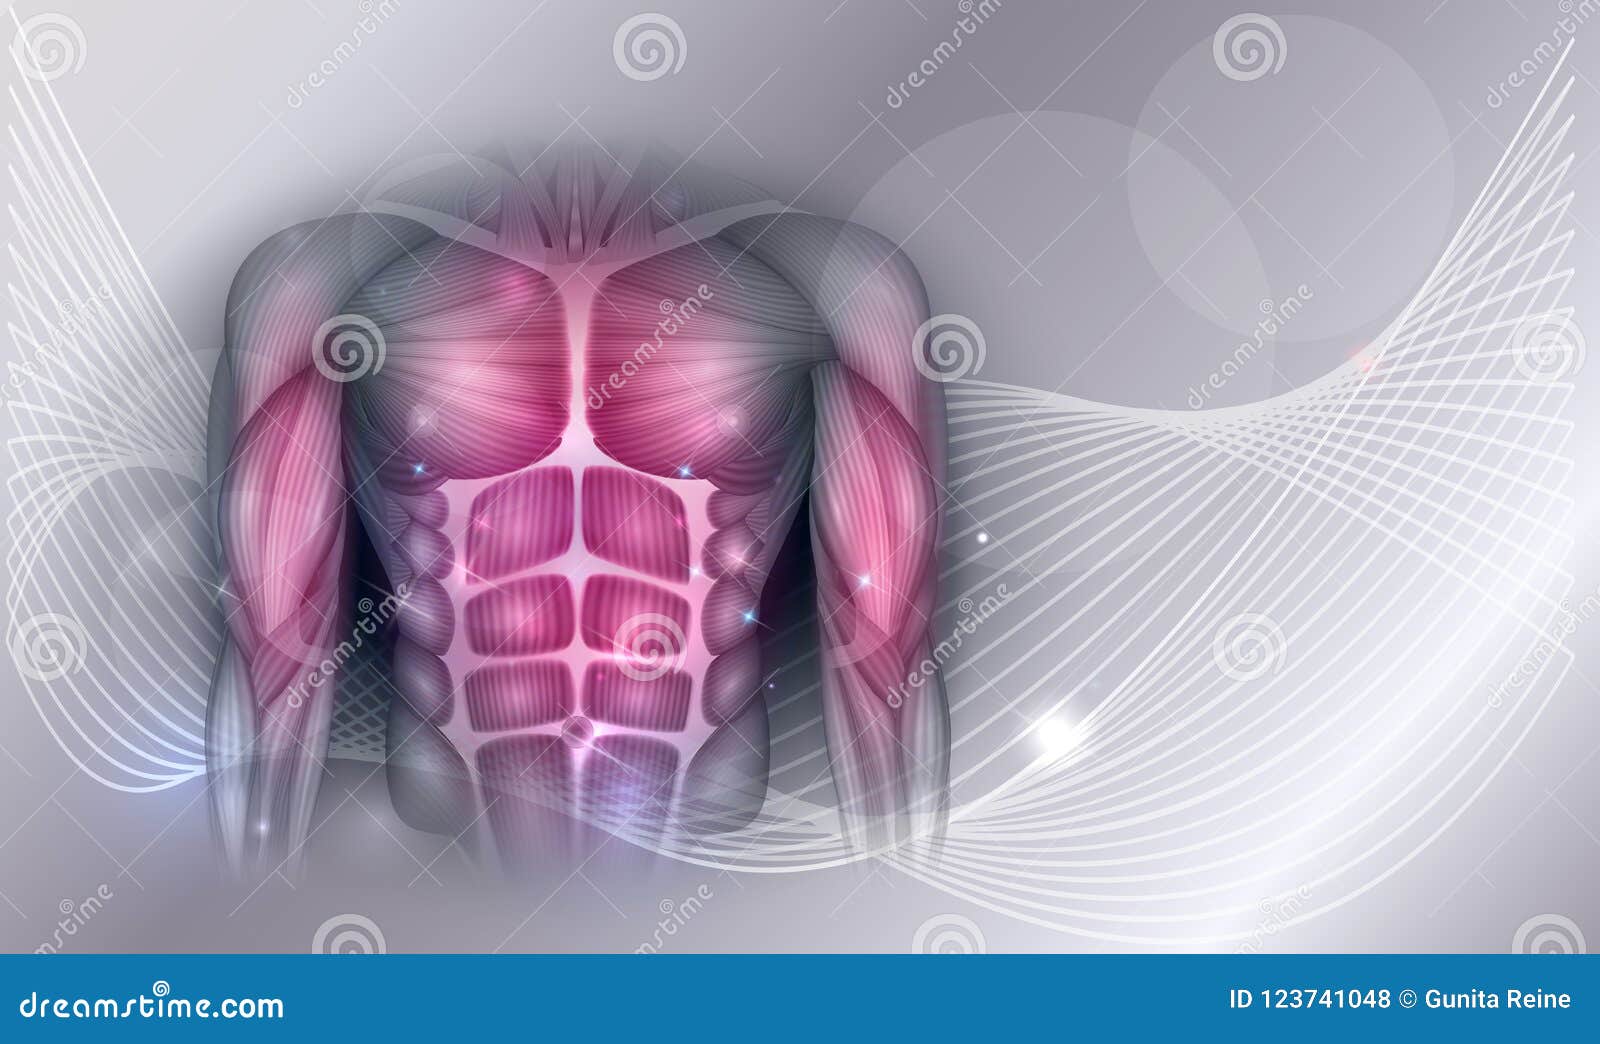 Muscles Chest Stock Illustrations 1 447 Muscles Chest Stock Illustrations Vectors Clipart Dreamstime